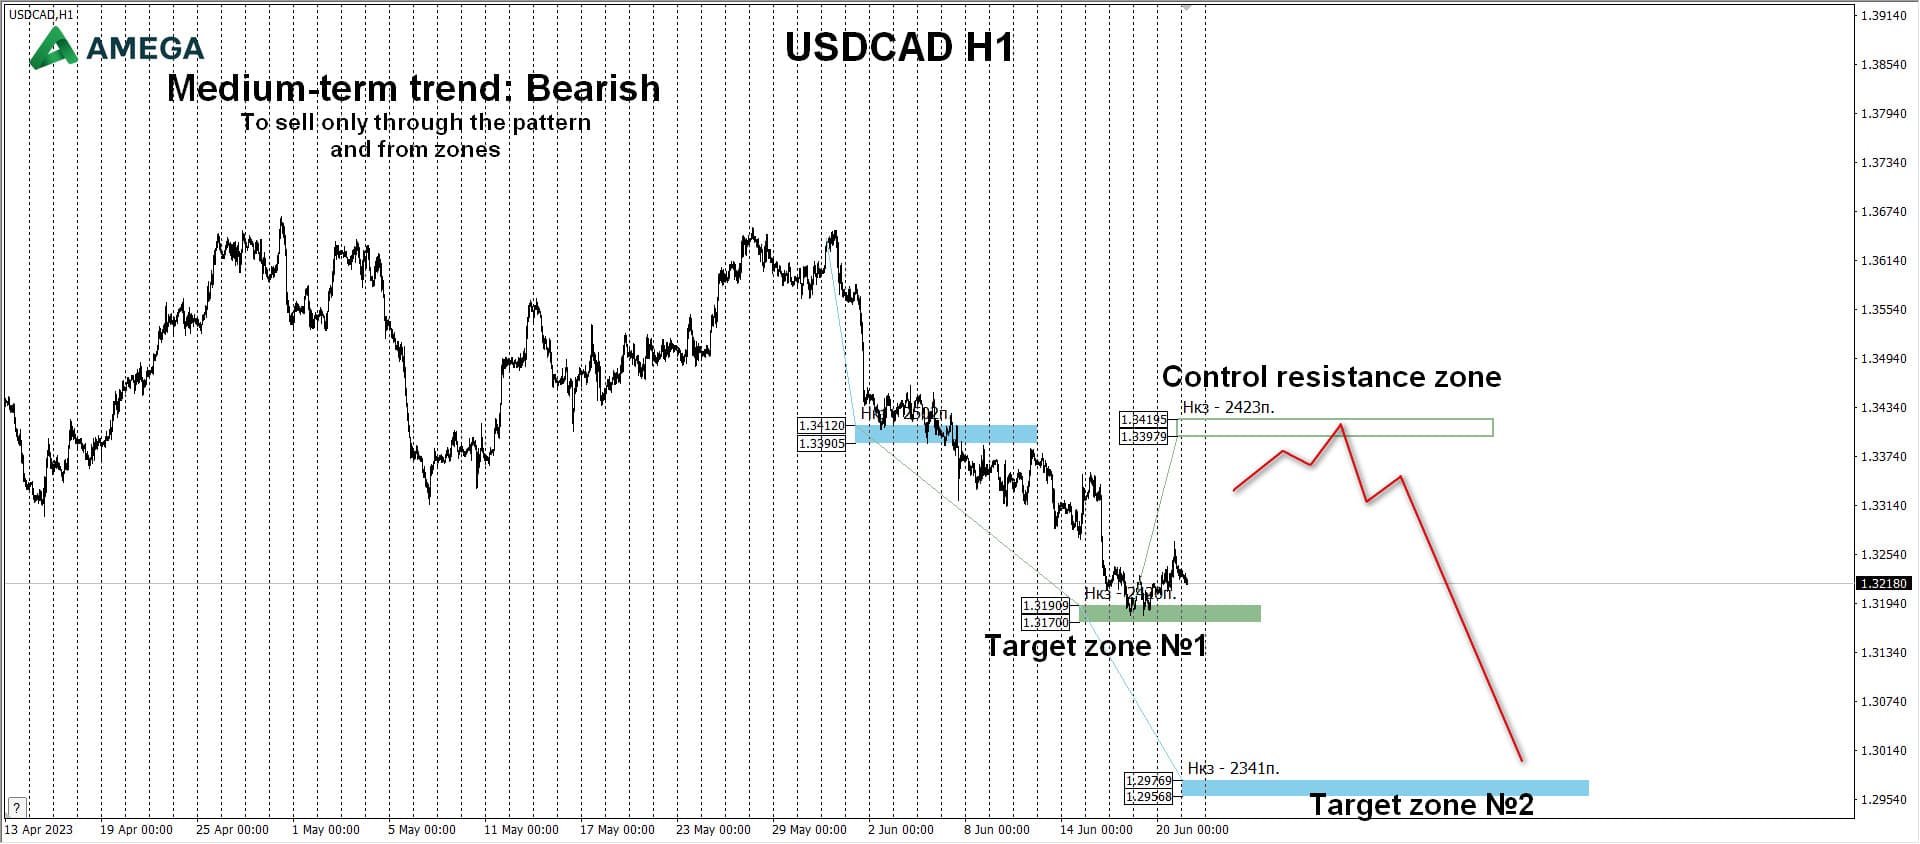 USDCAD: The price has already reached the target zone №1 1.31909-1.31700